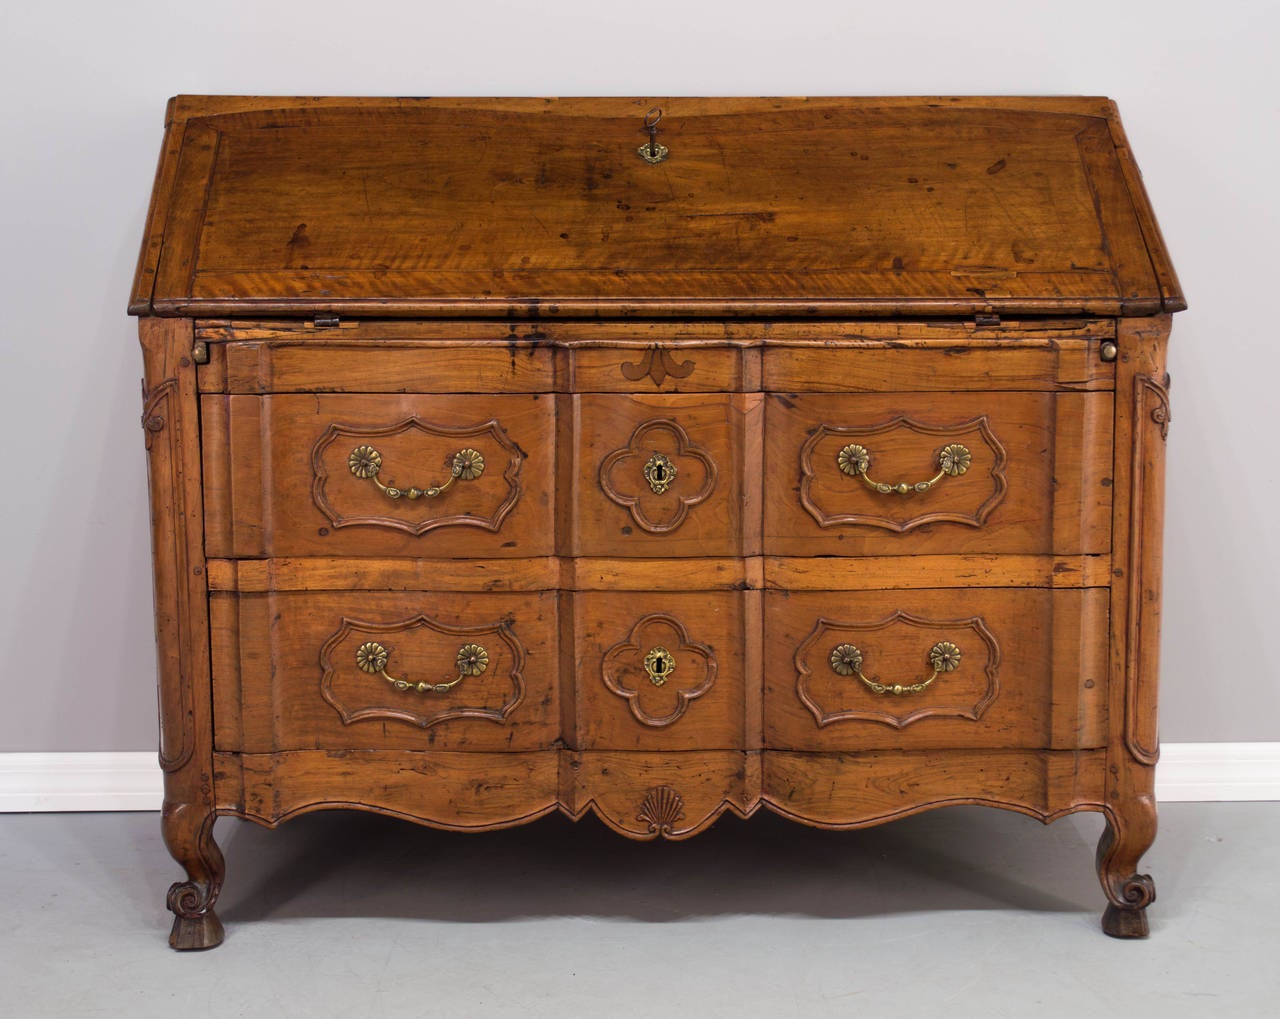 A fine Period 18th c. Louis XV scriban or slant desk from the Southwest of France, c.1740-1760. Made of solid walnut with serpentine front and two dovetailed drawers. Desk opens to reveal small drawers with two secret compartments. Curved legs